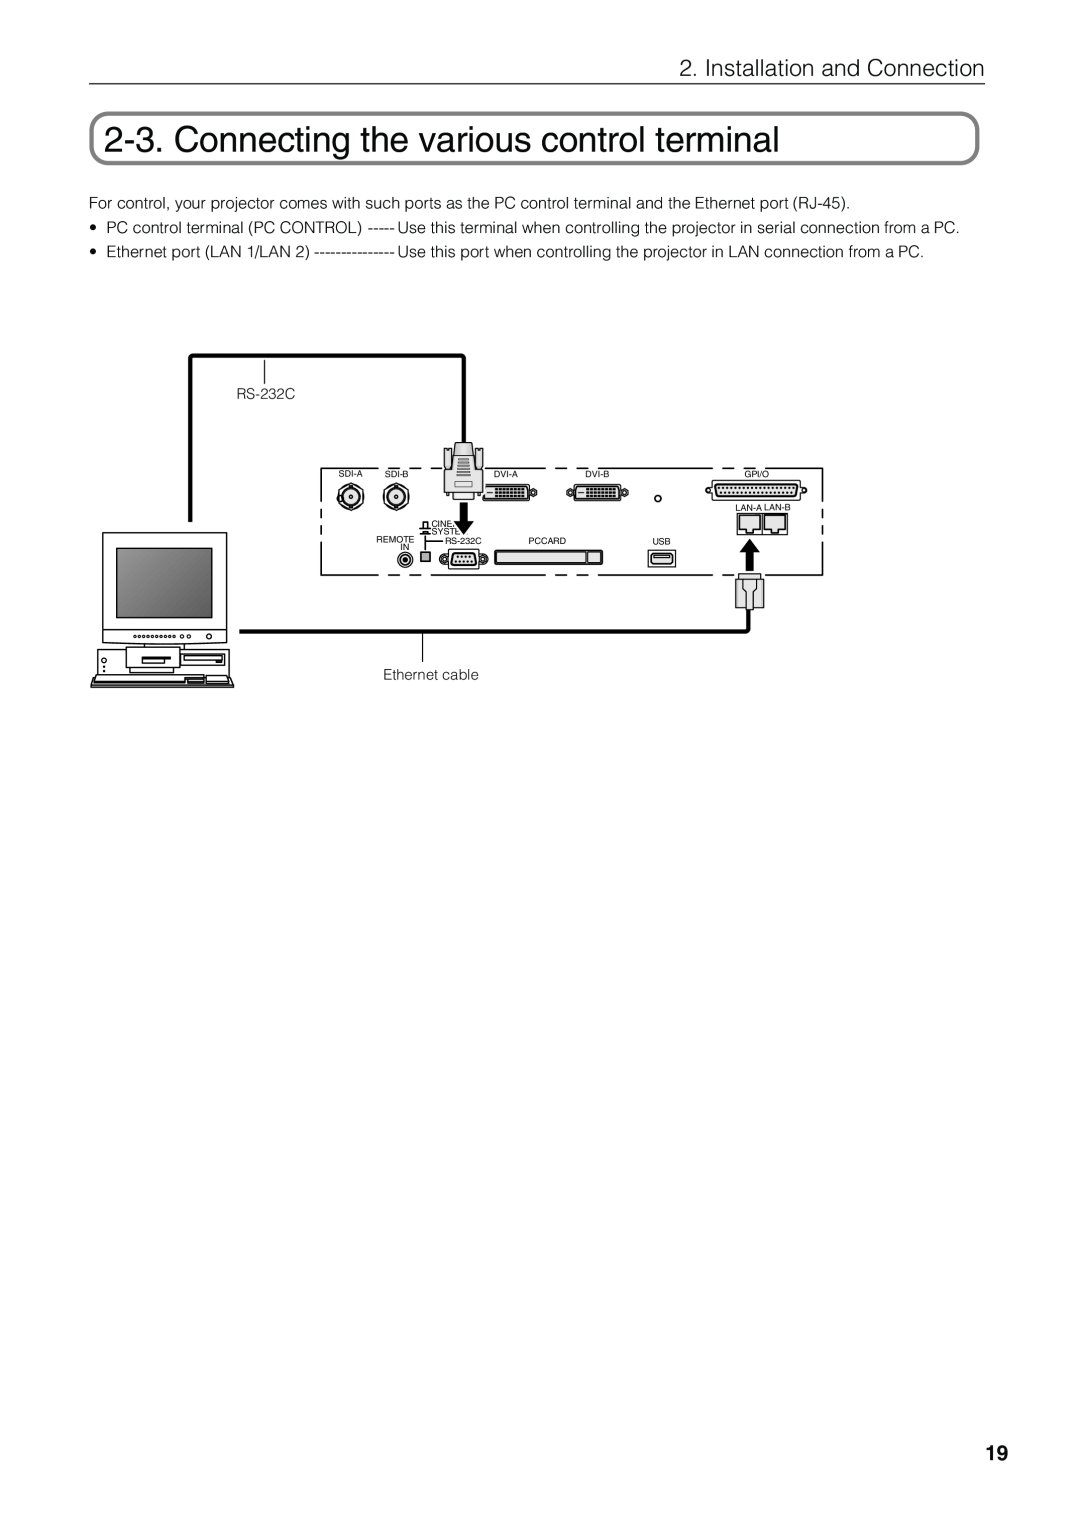 NEC NC1600C user manual Connecting the various control terminal, Installation and Connection, RS-232C, Ethernet cable 